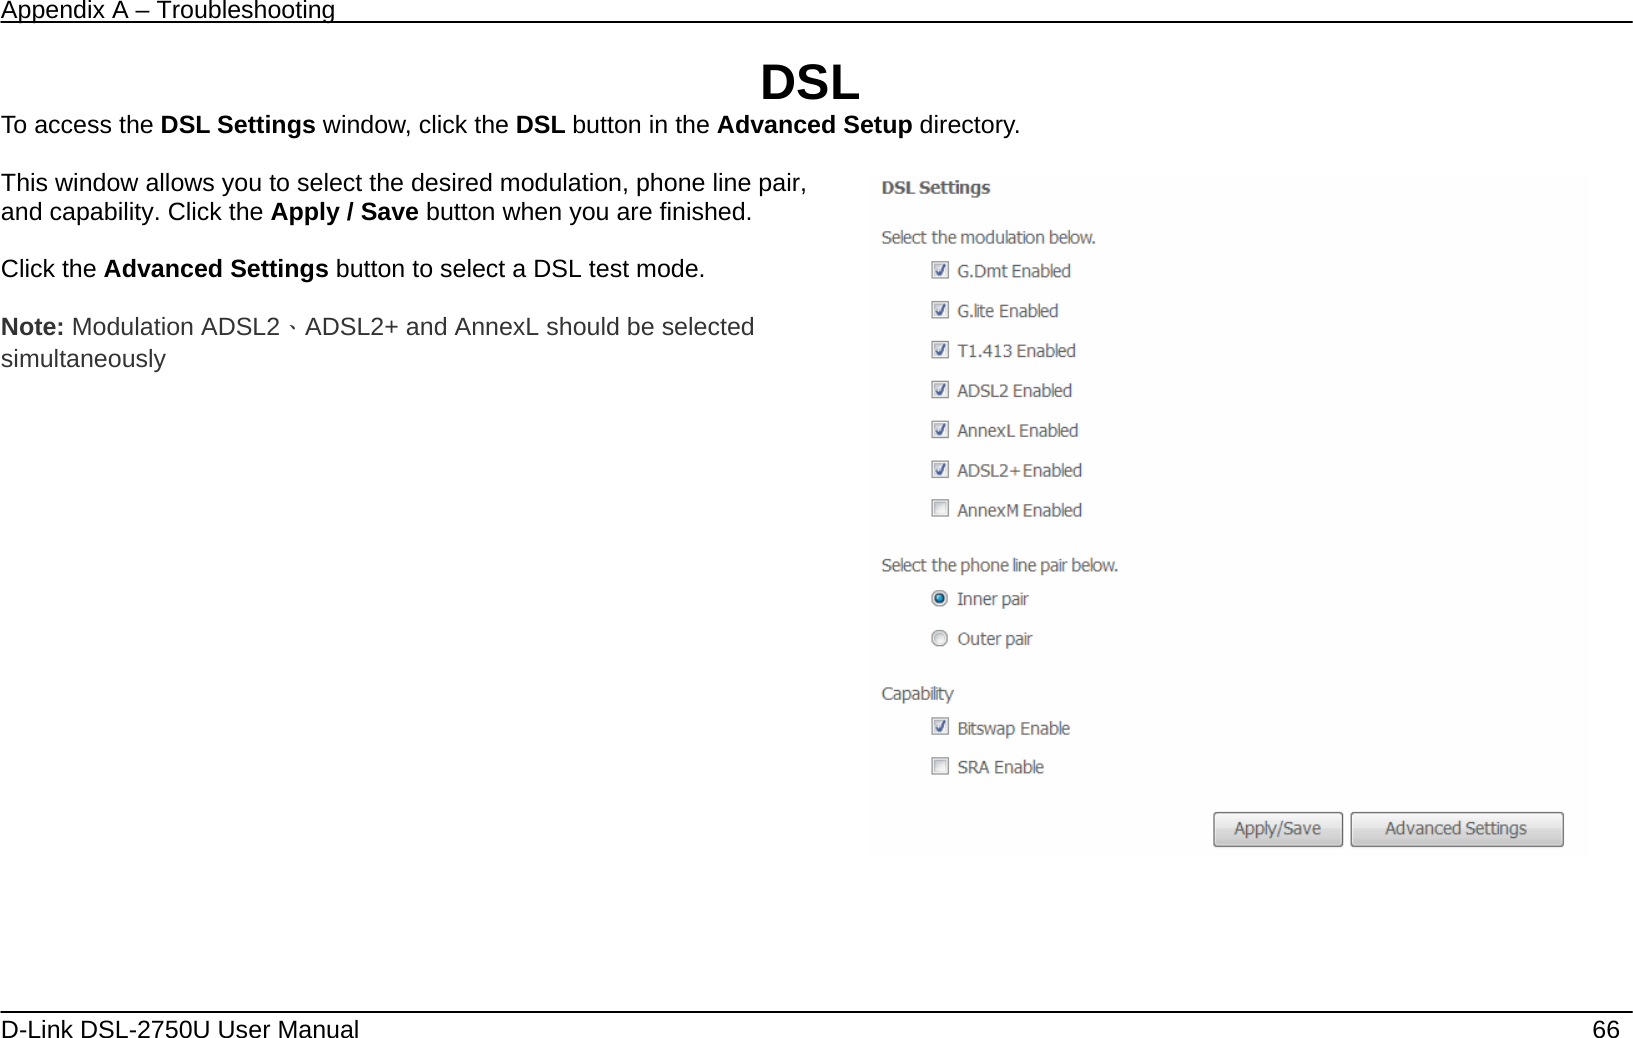 Appendix A – Troubleshooting   D-Link DSL-2750U User Manual    66 DSL To access the DSL Settings window, click the DSL button in the Advanced Setup directory.  This window allows you to select the desired modulation, phone line pair, and capability. Click the Apply / Save button when you are finished.  Click the Advanced Settings button to select a DSL test mode.  Note: Modulation ADSL2、ADSL2+ and AnnexL should be selected simultaneously      